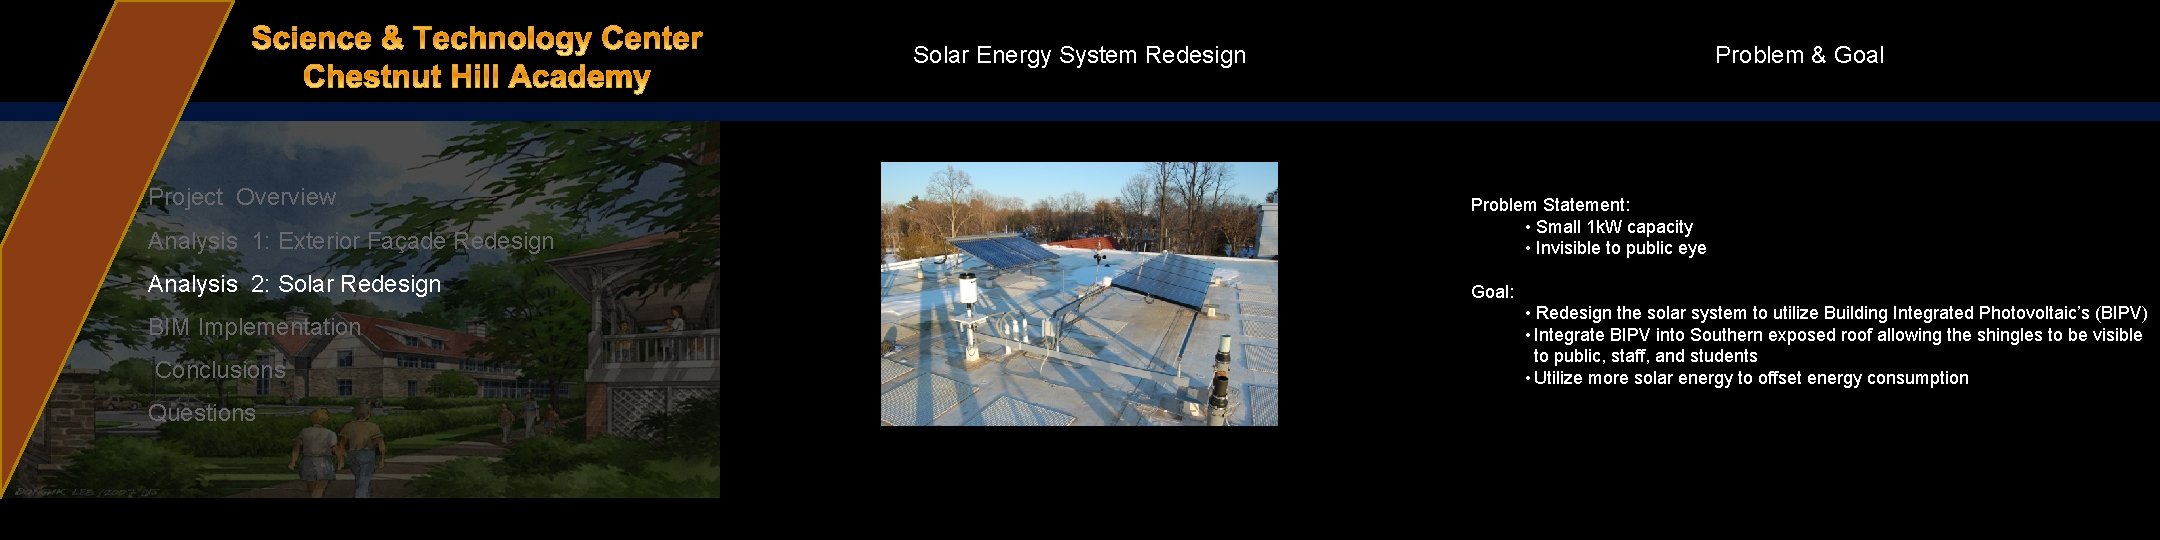 Problem & Goal Solar Energy System Redesign Project Overview Analysis 1: Exterior Façade Redesign